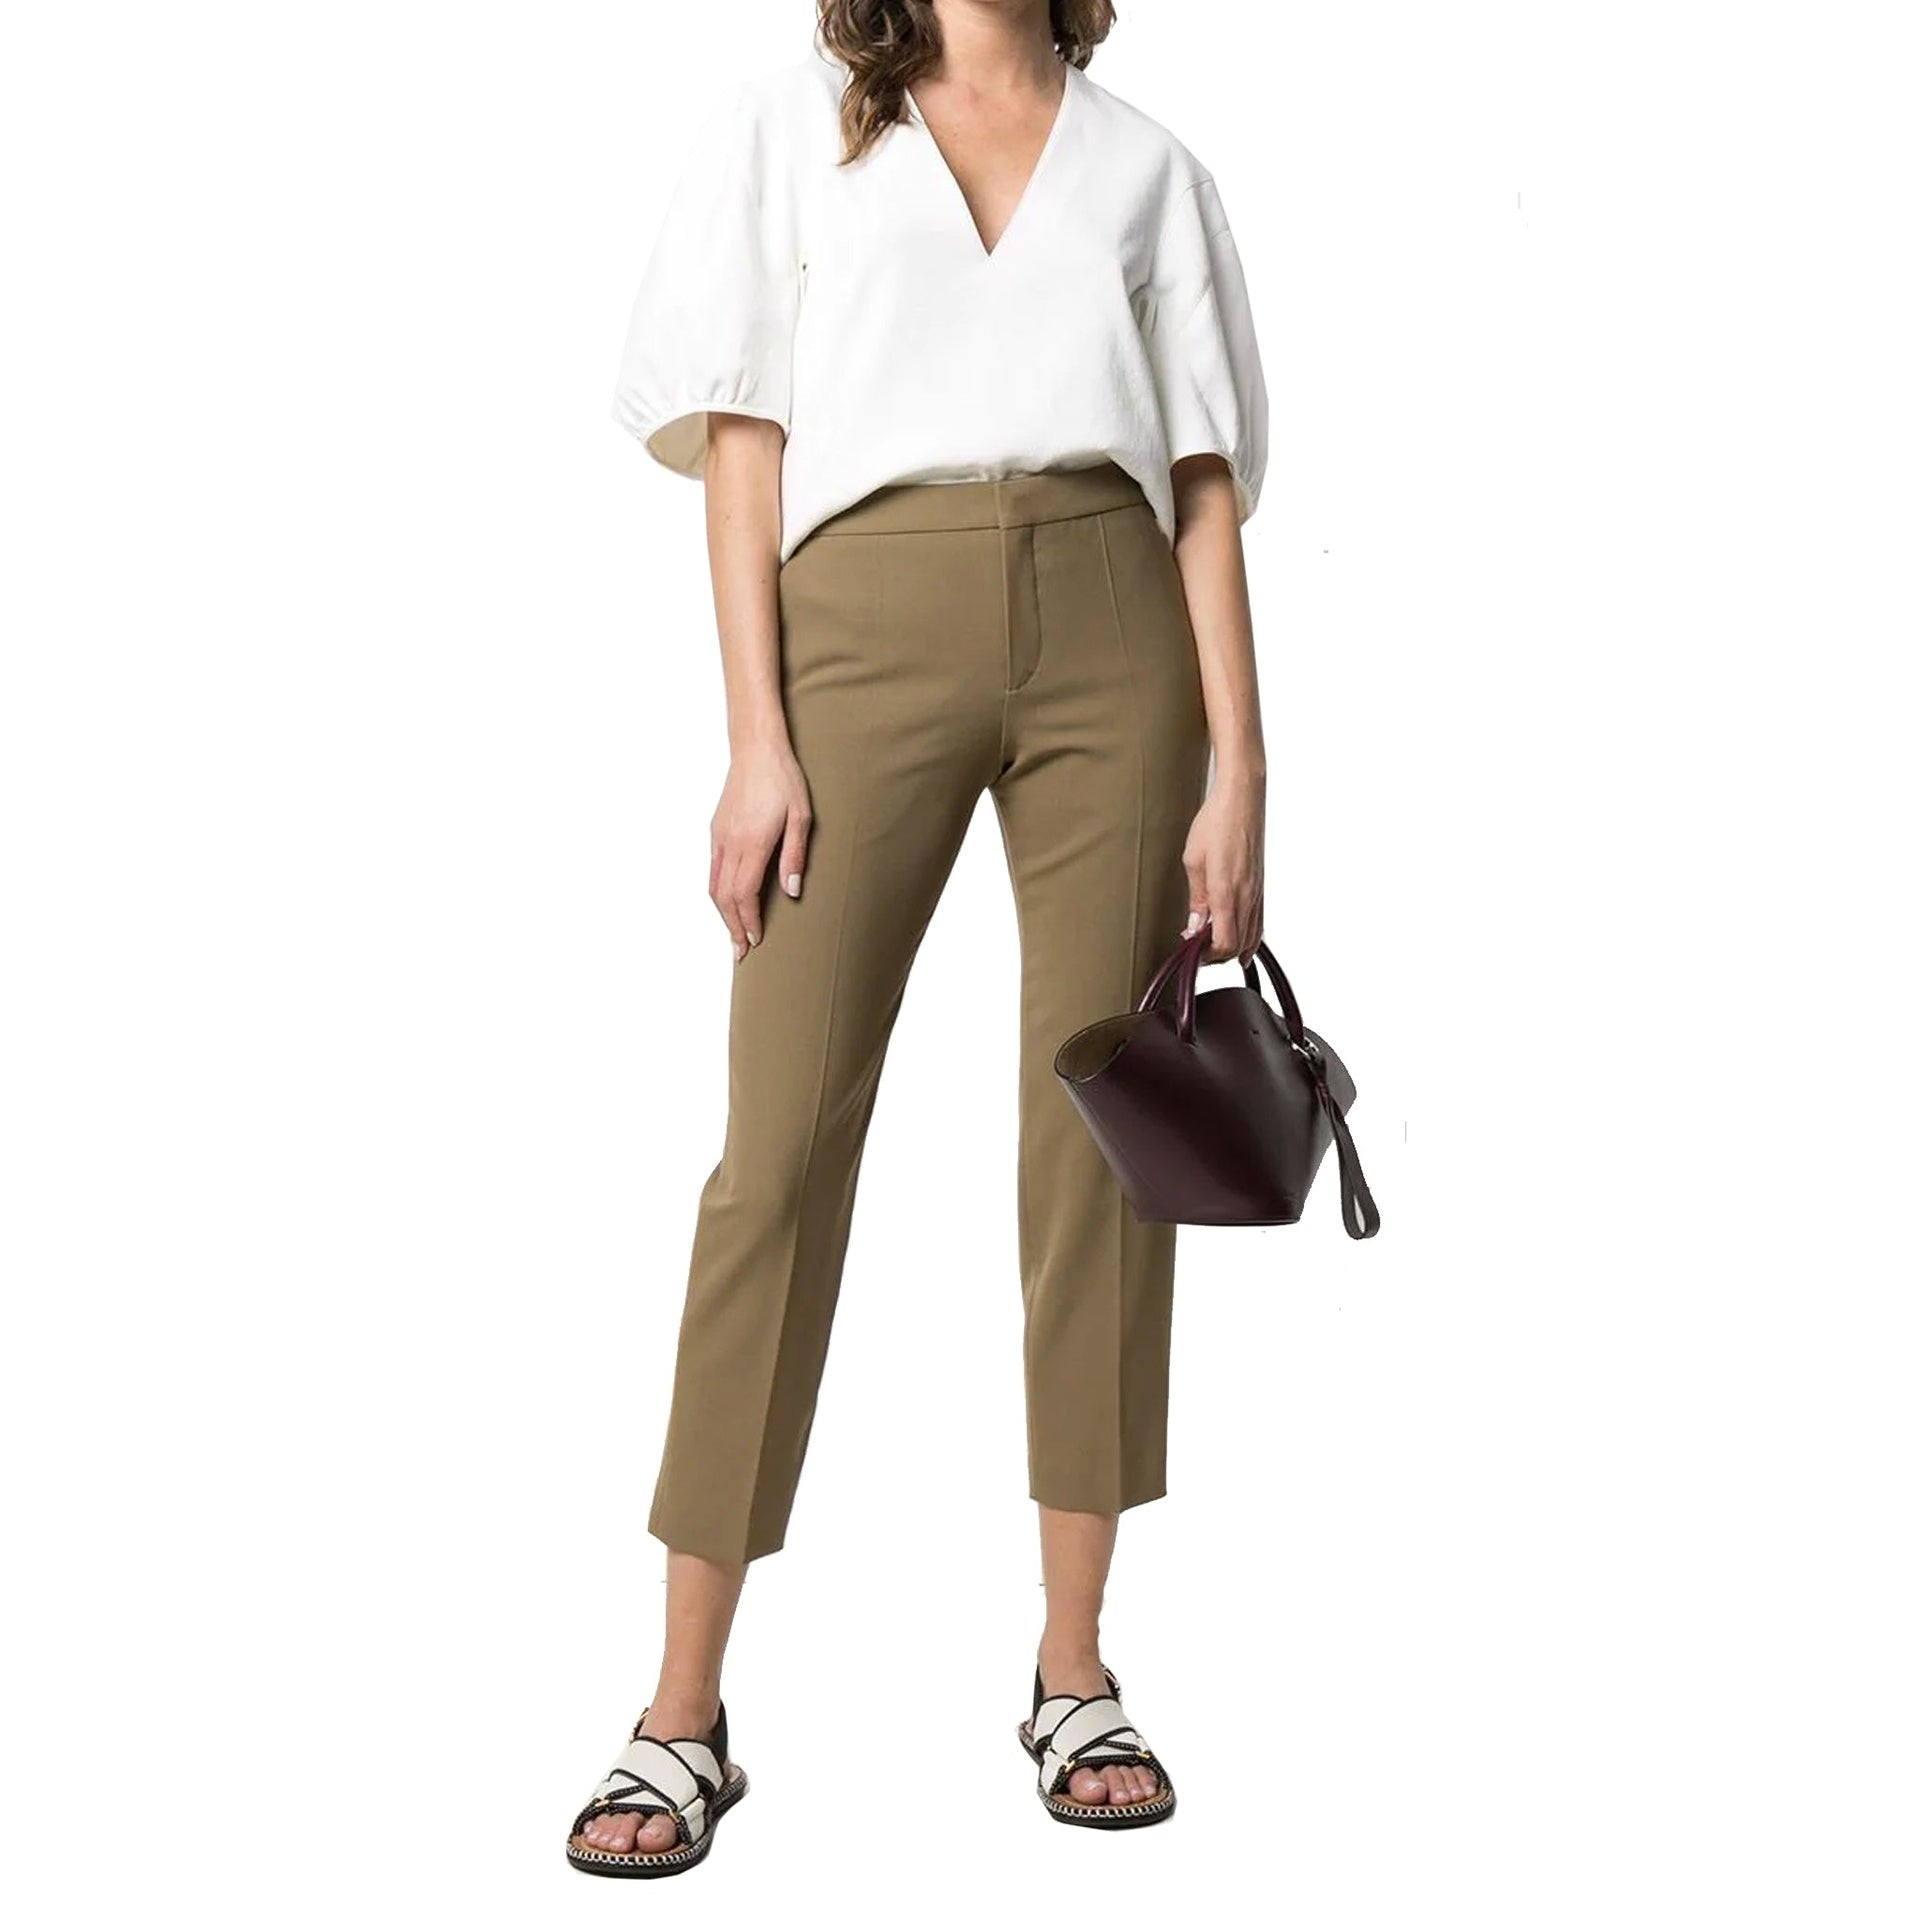 CHLOE-OUTLET-SALE-Chloe-Cropped-Tailored-Trousers-Hosen-BROWN-40-ARCHIVE-COLLECTION-2.jpg